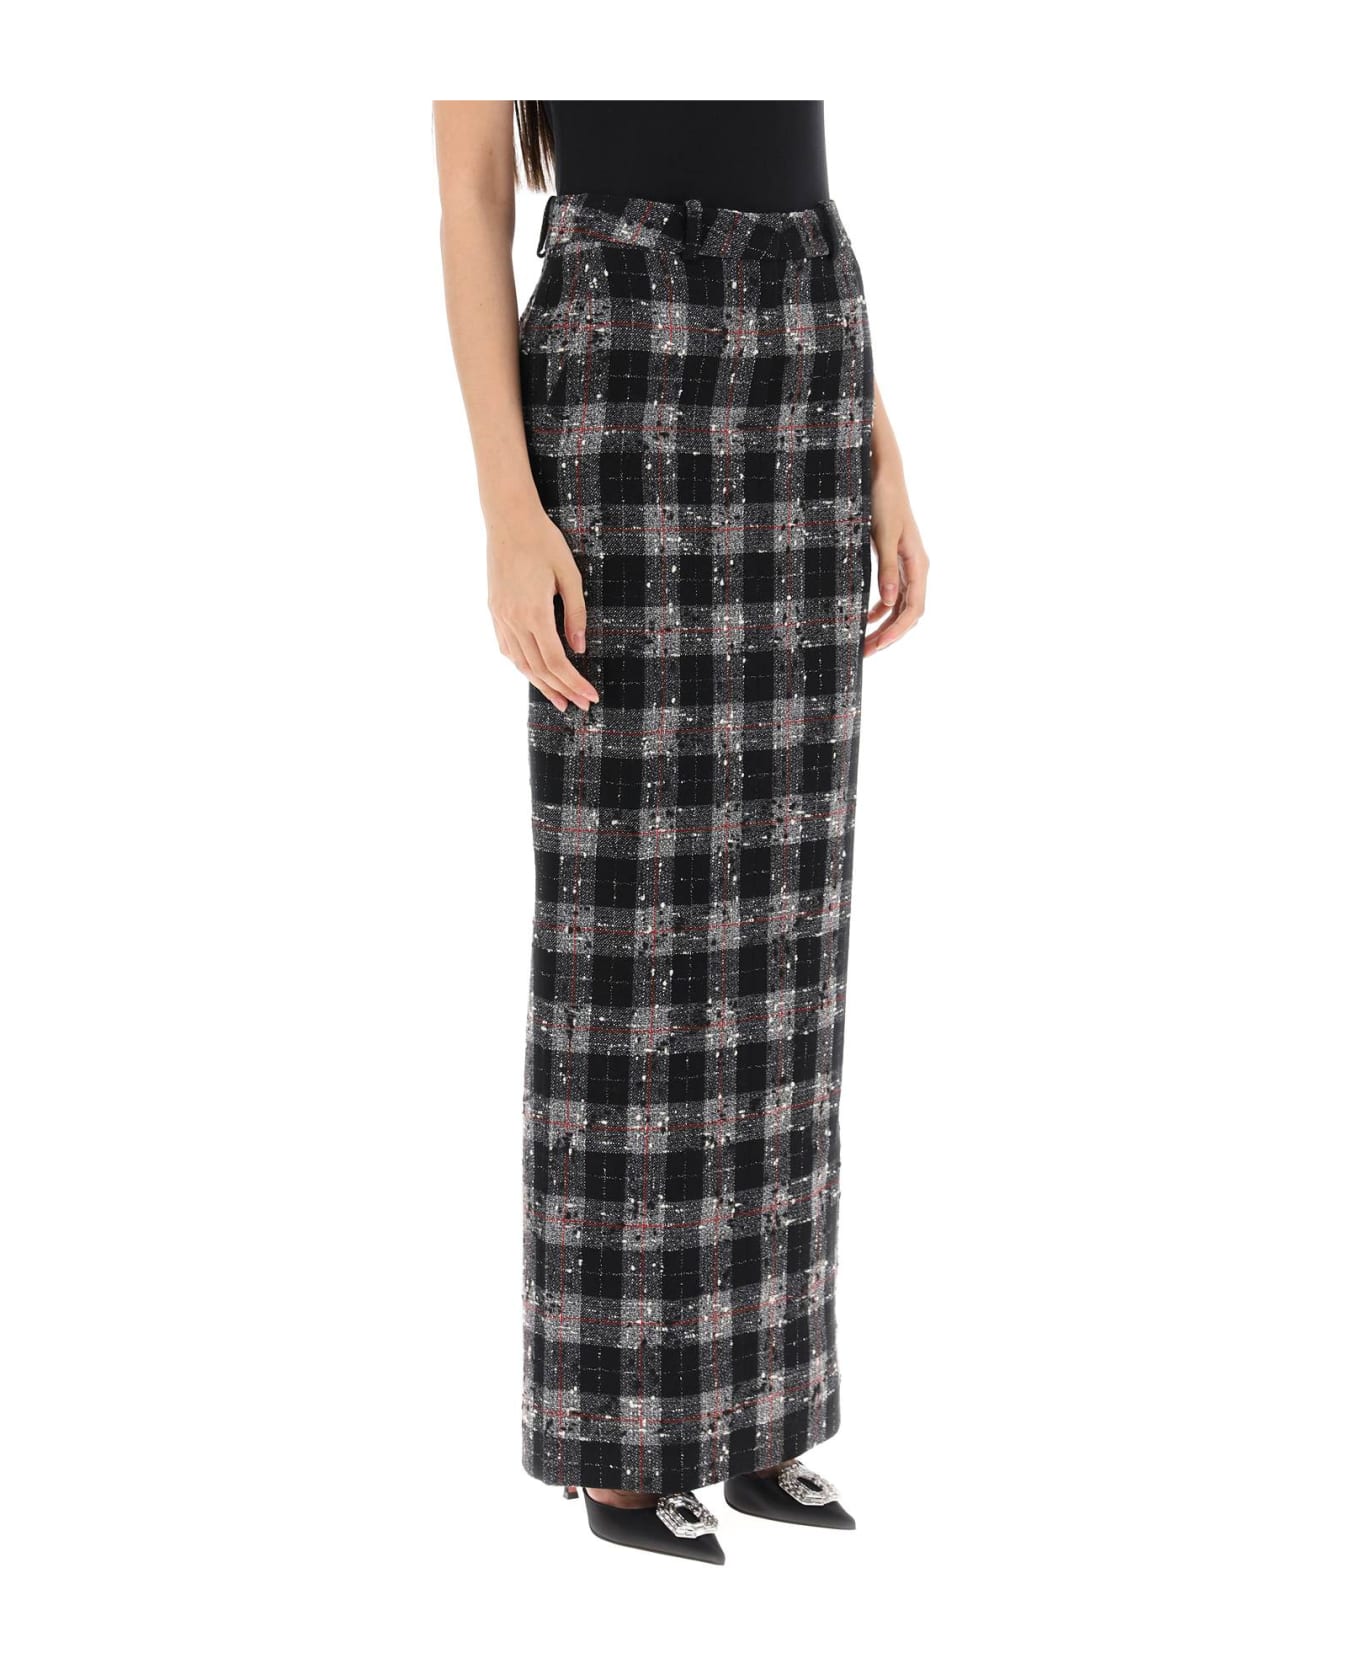 Alessandra Rich Maxi Skirt In Boucle' Fabric With Check Motif - BLACK (Black)